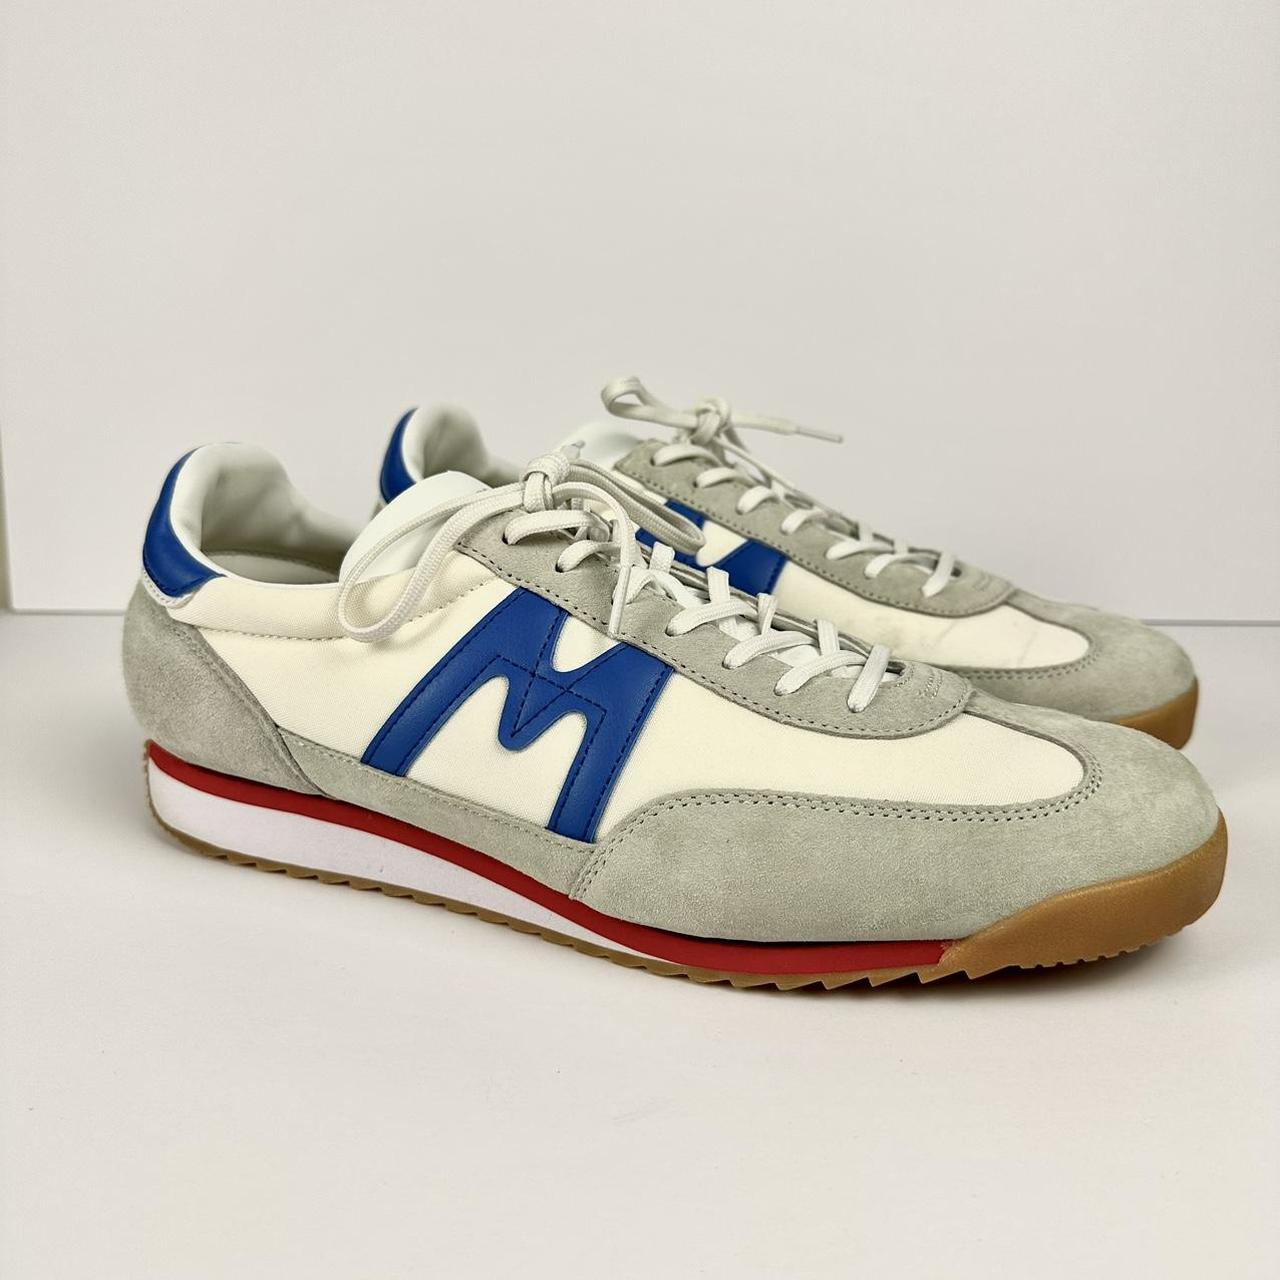 Karhu Men's White and Blue Trainers